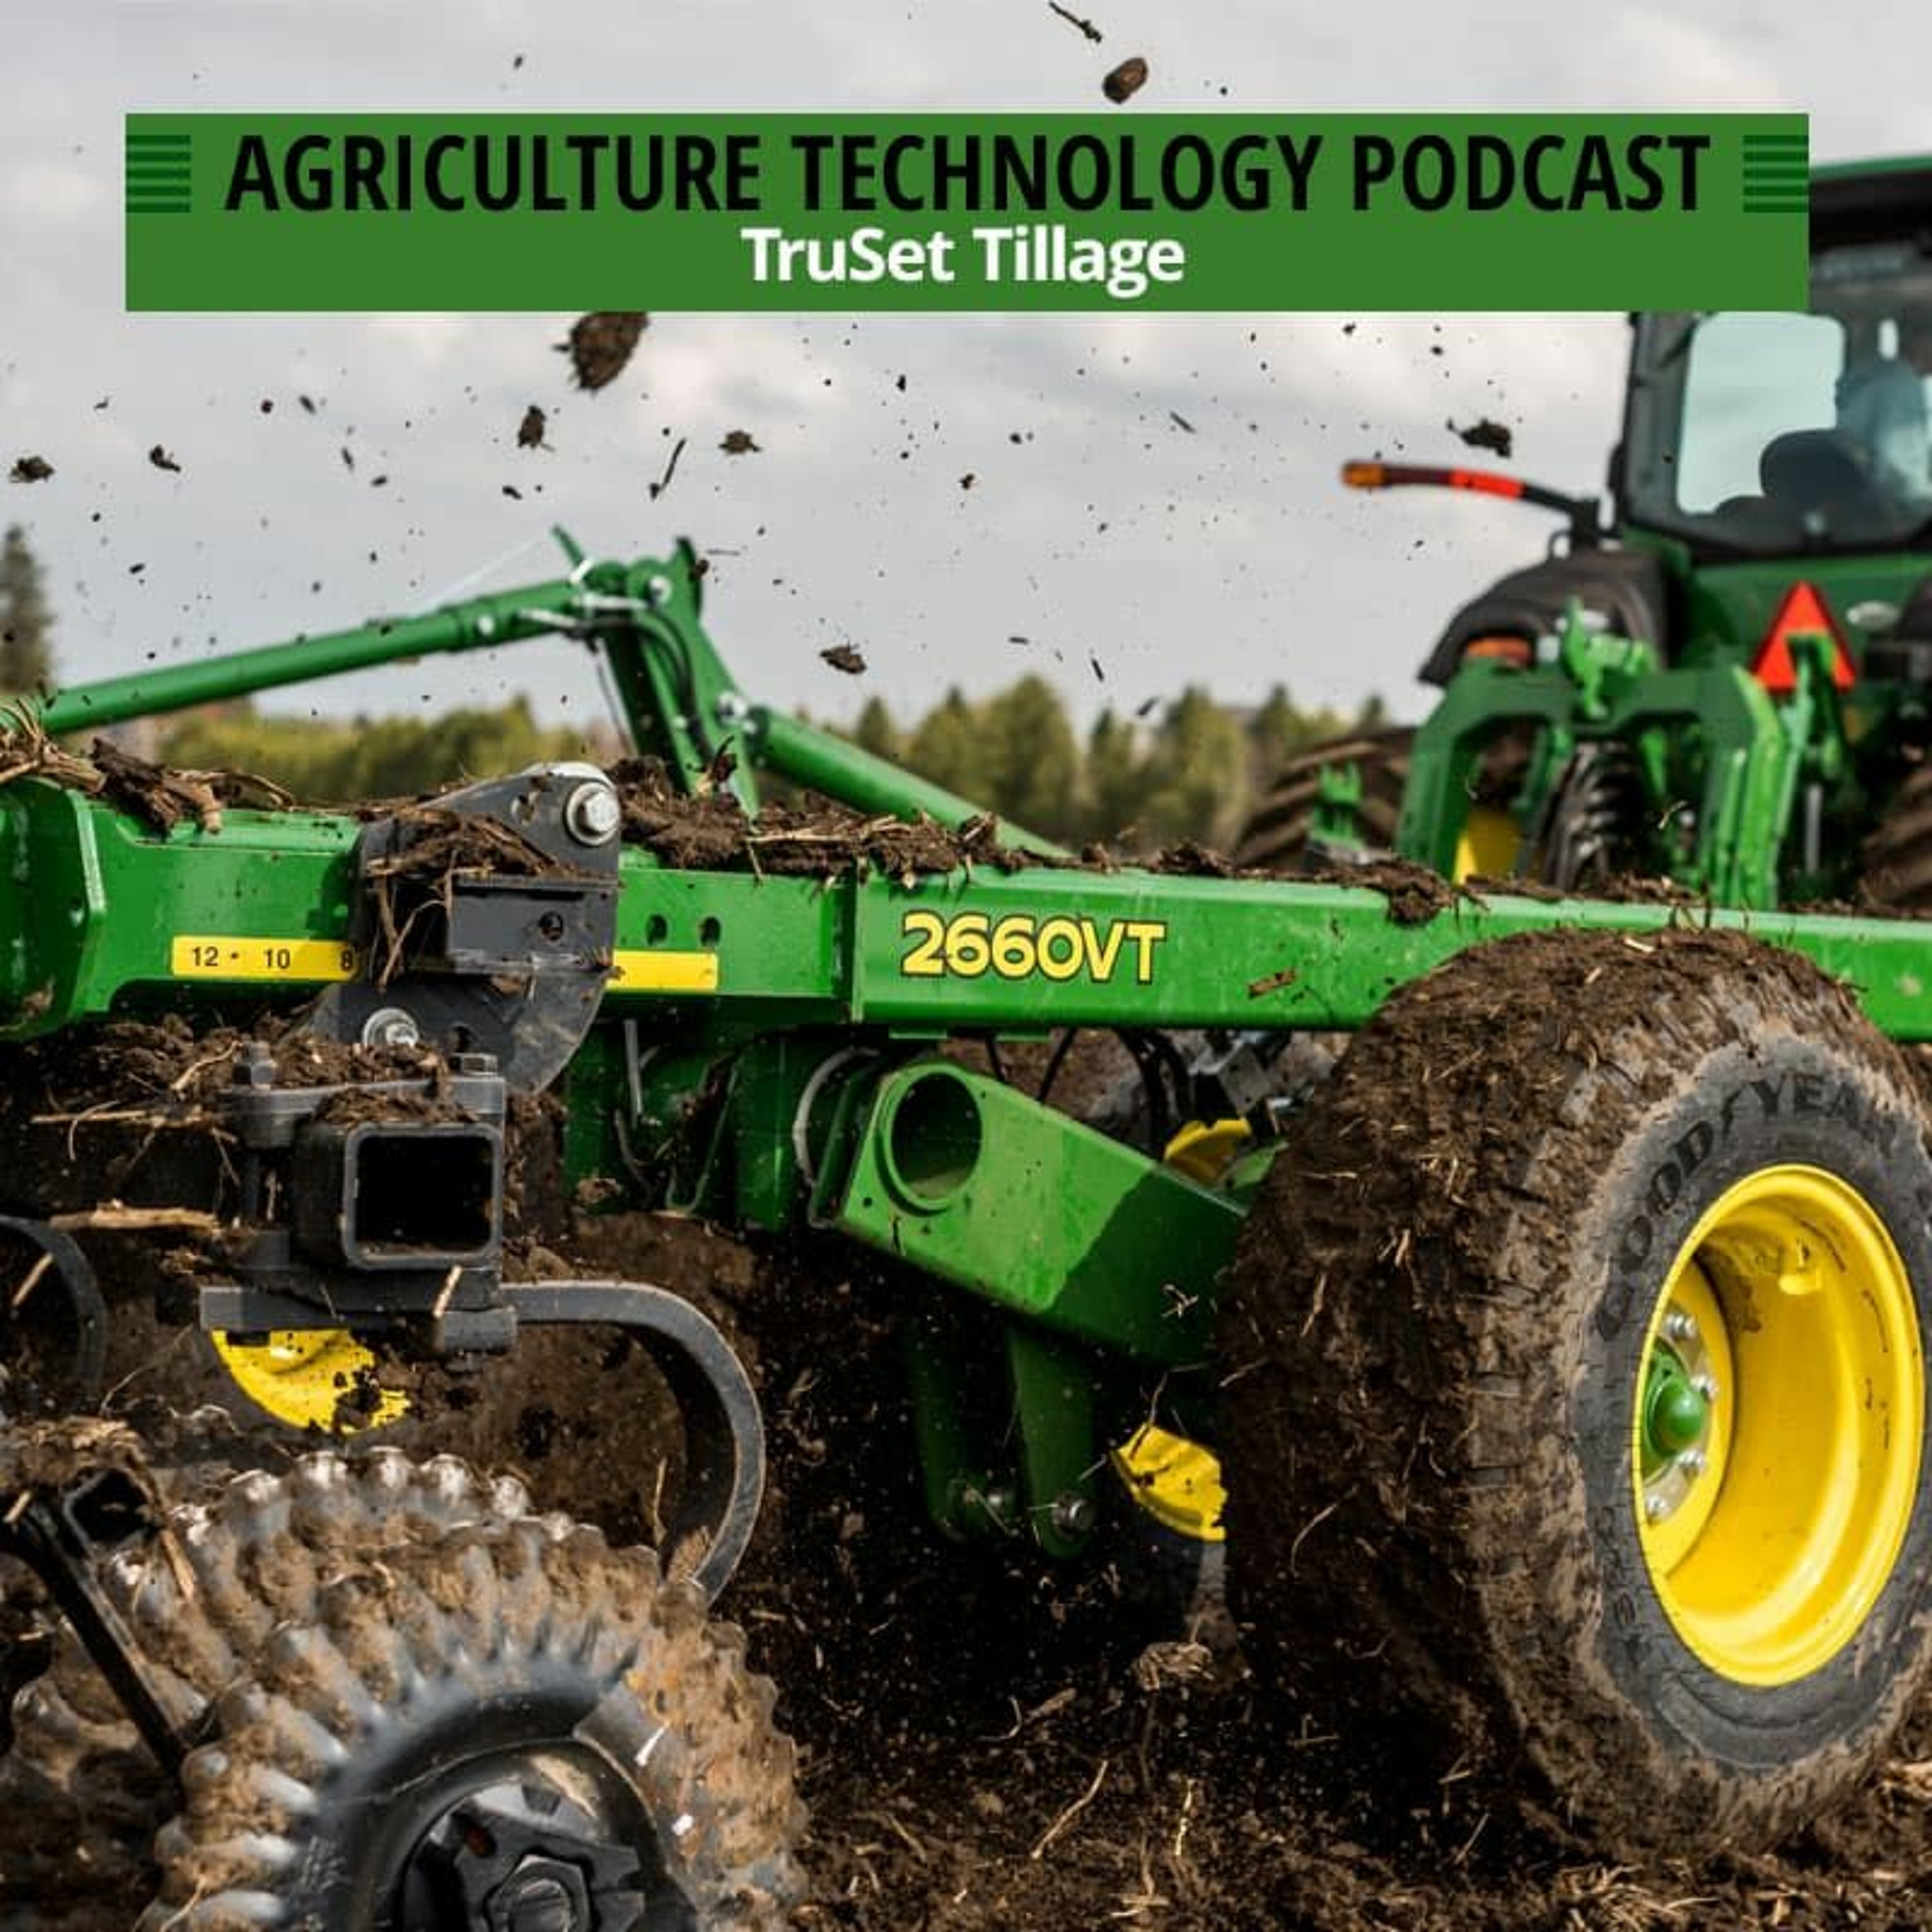 Ep 69 John Deere Starfire Gps With Terry Pickett Agriculture Technology Podcast Podcast Podtail